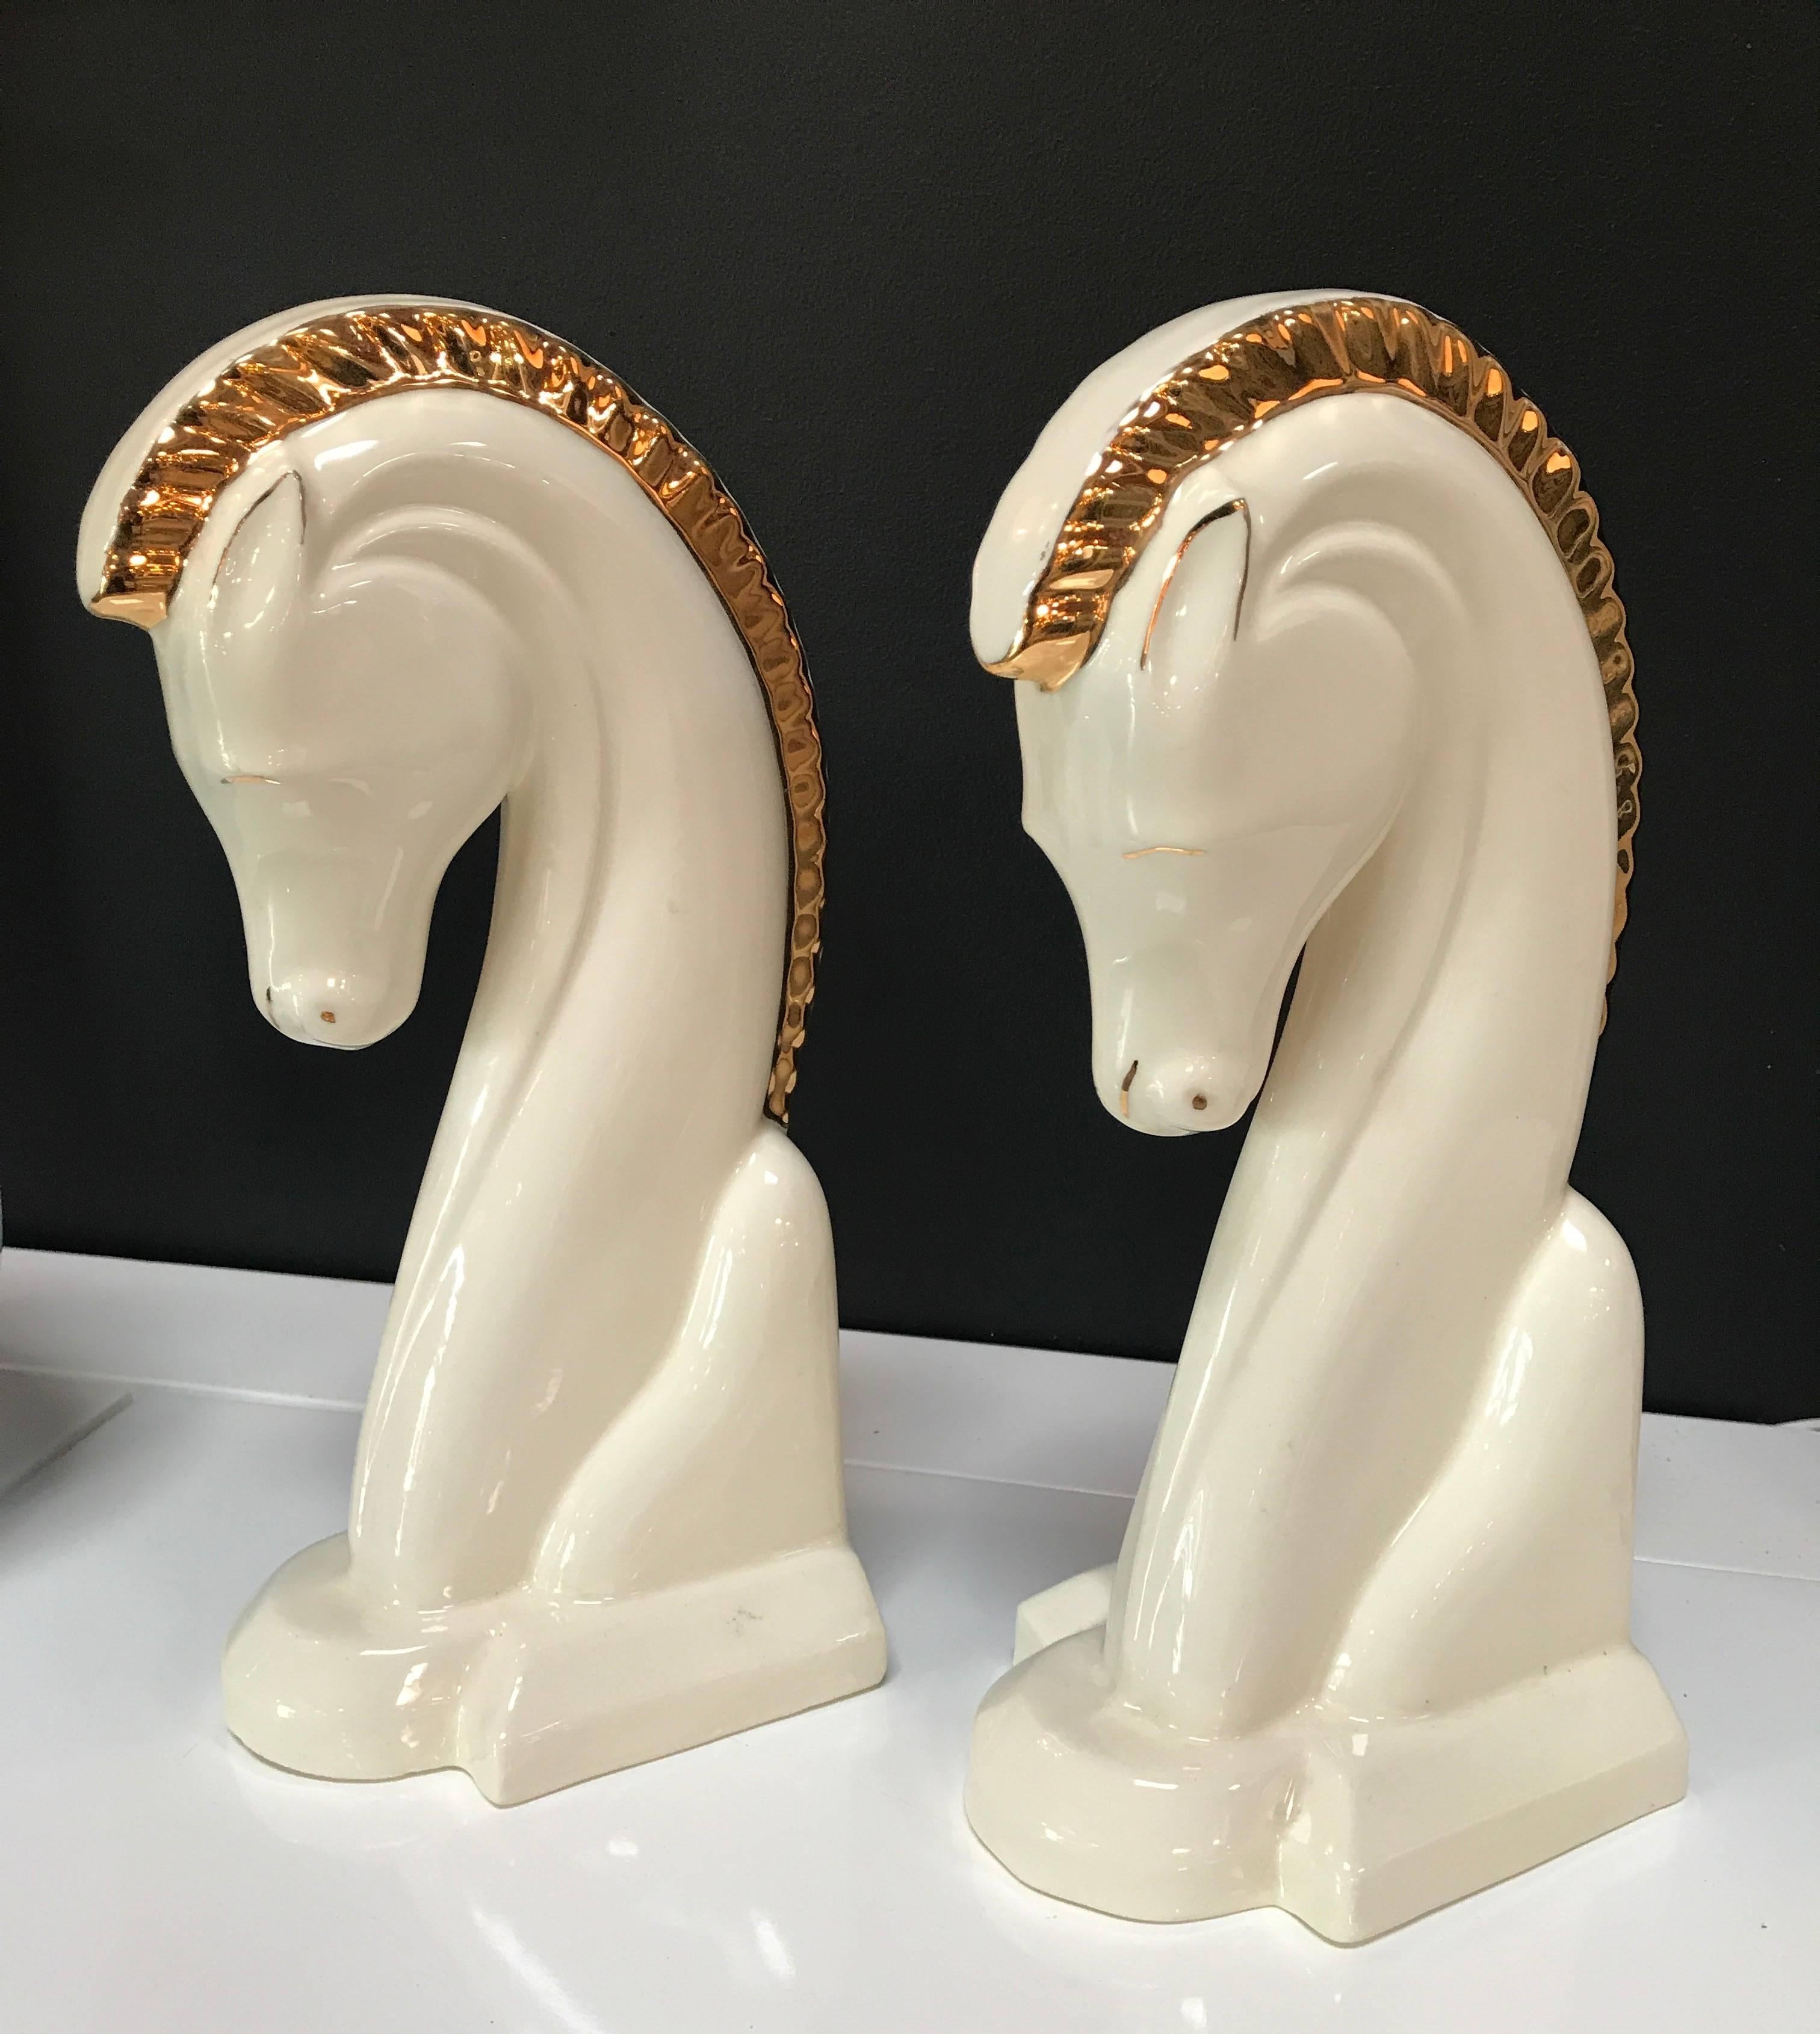 Two ceramic horse head bookends in cream and rich gold, signed by the artist.